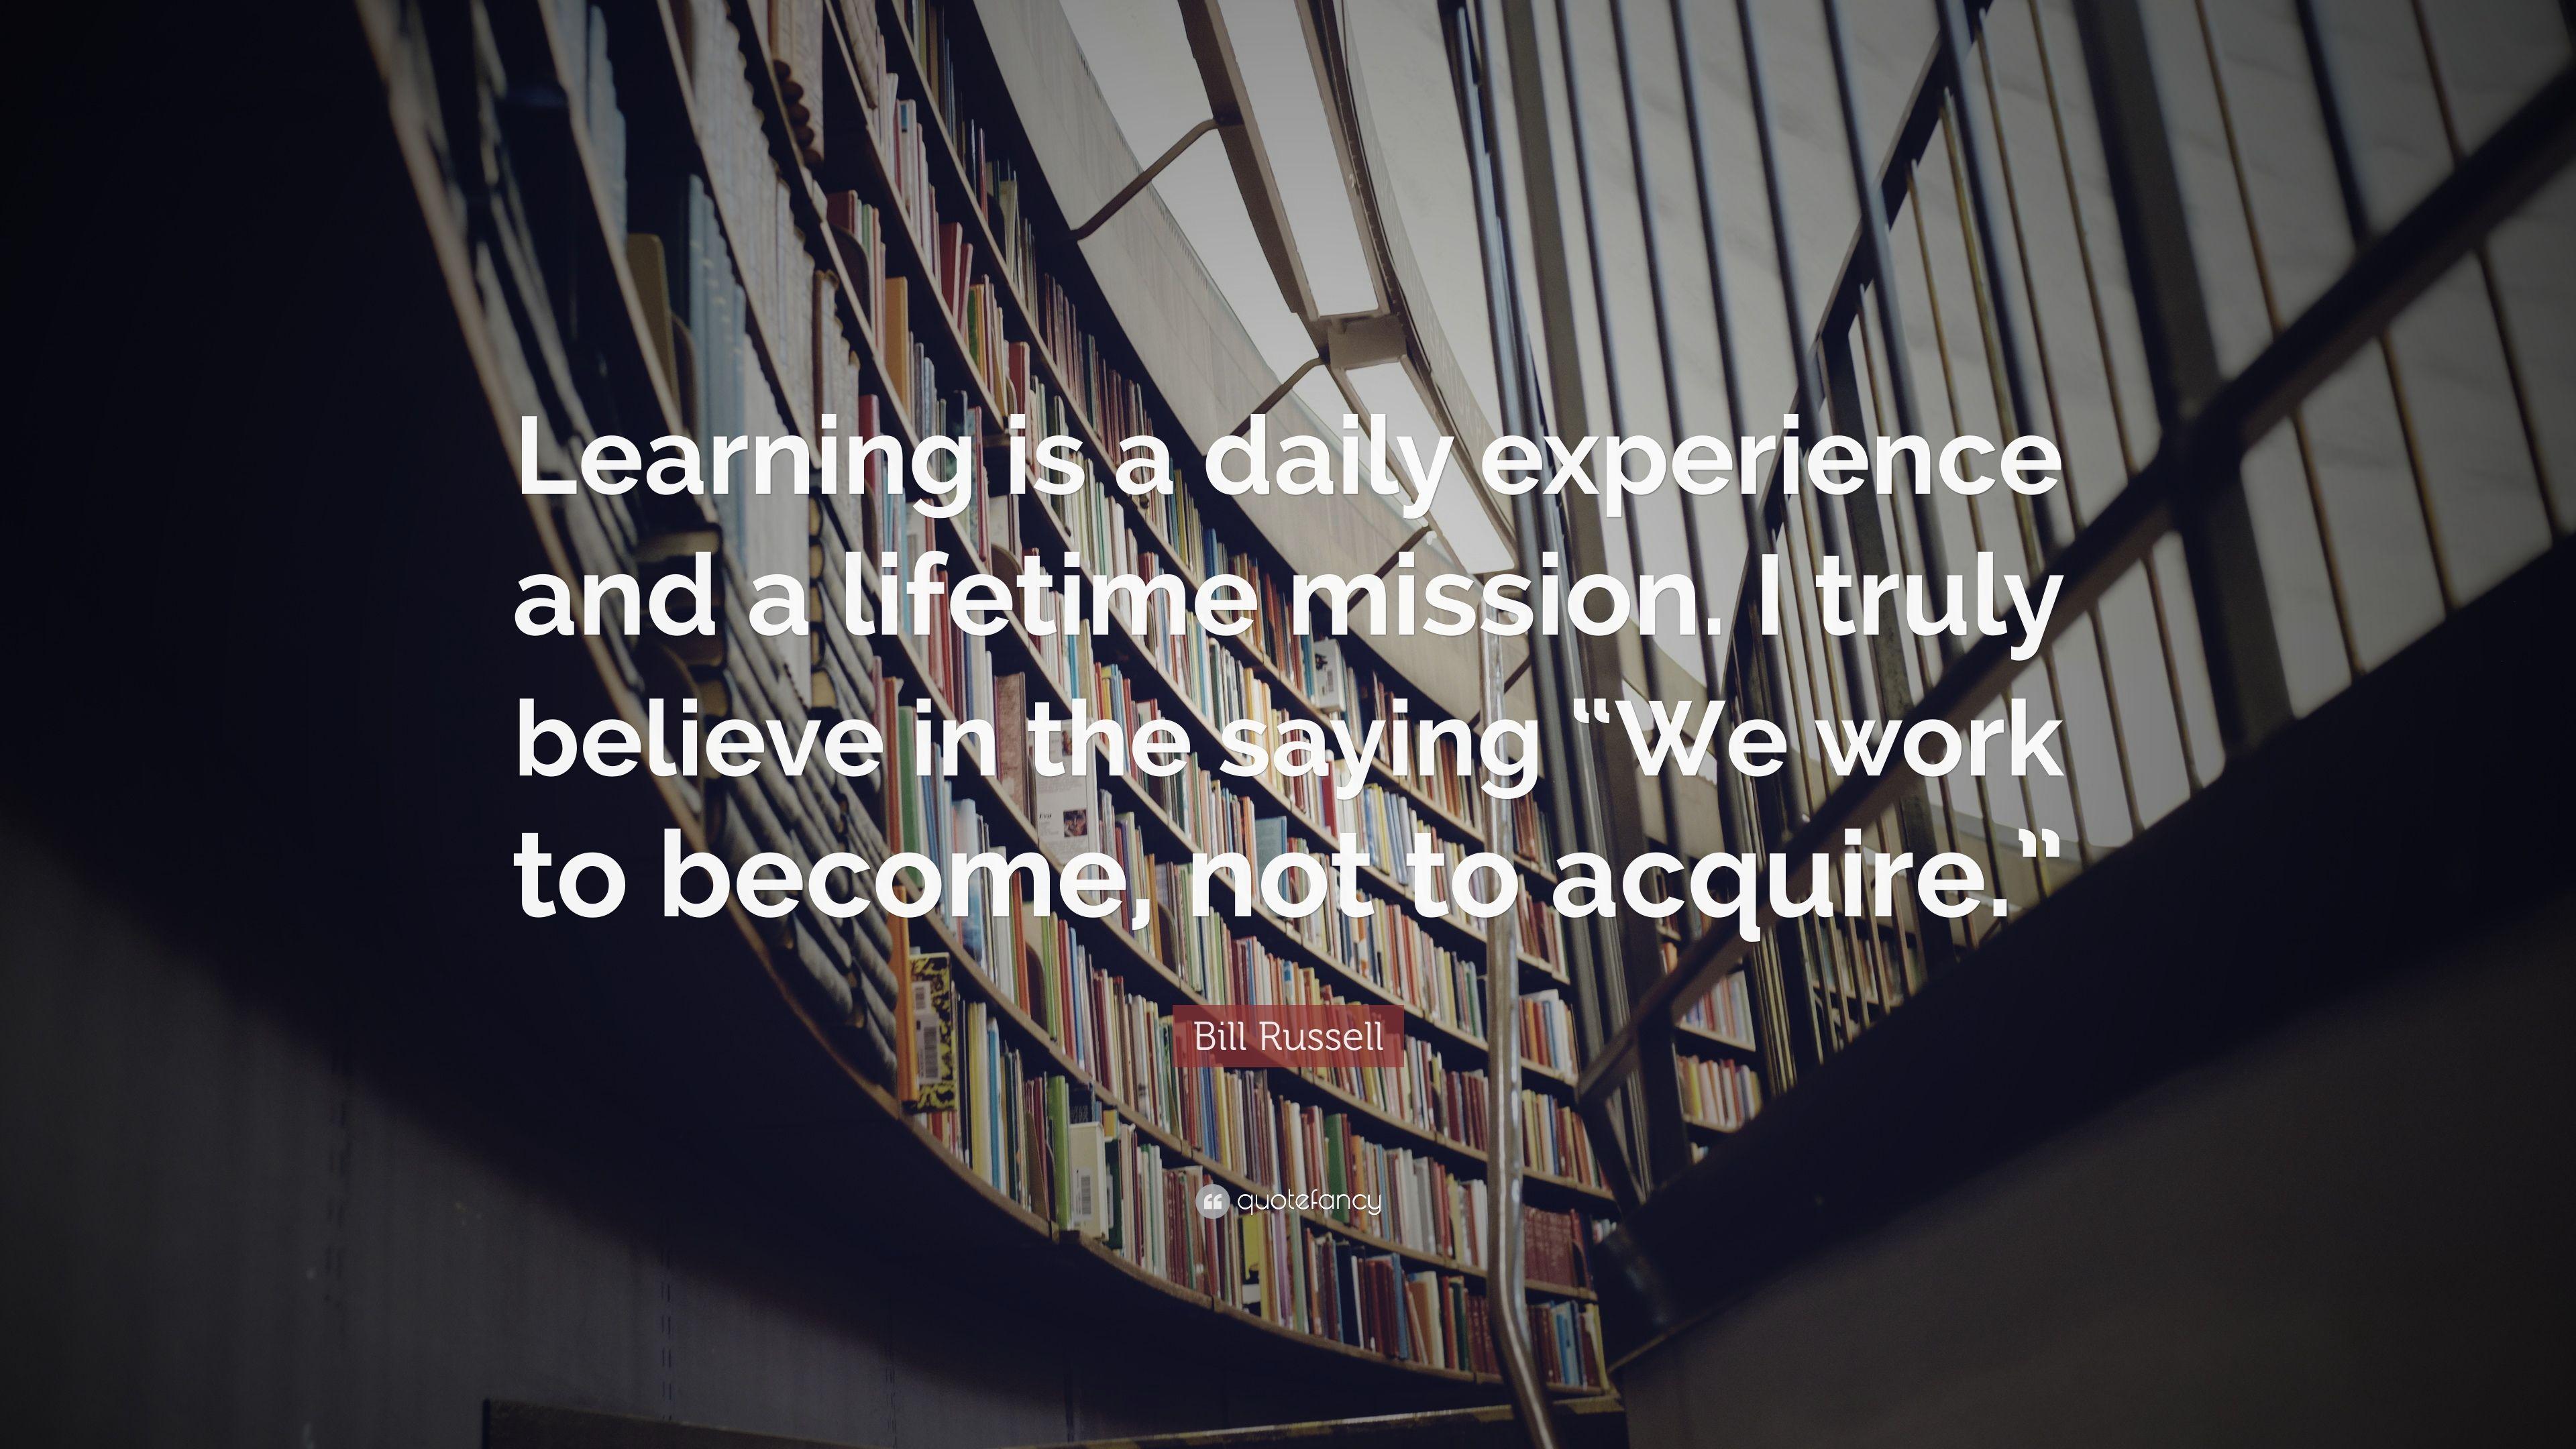 Bill Russell Quote: “Learning is a daily experience and a lifetime